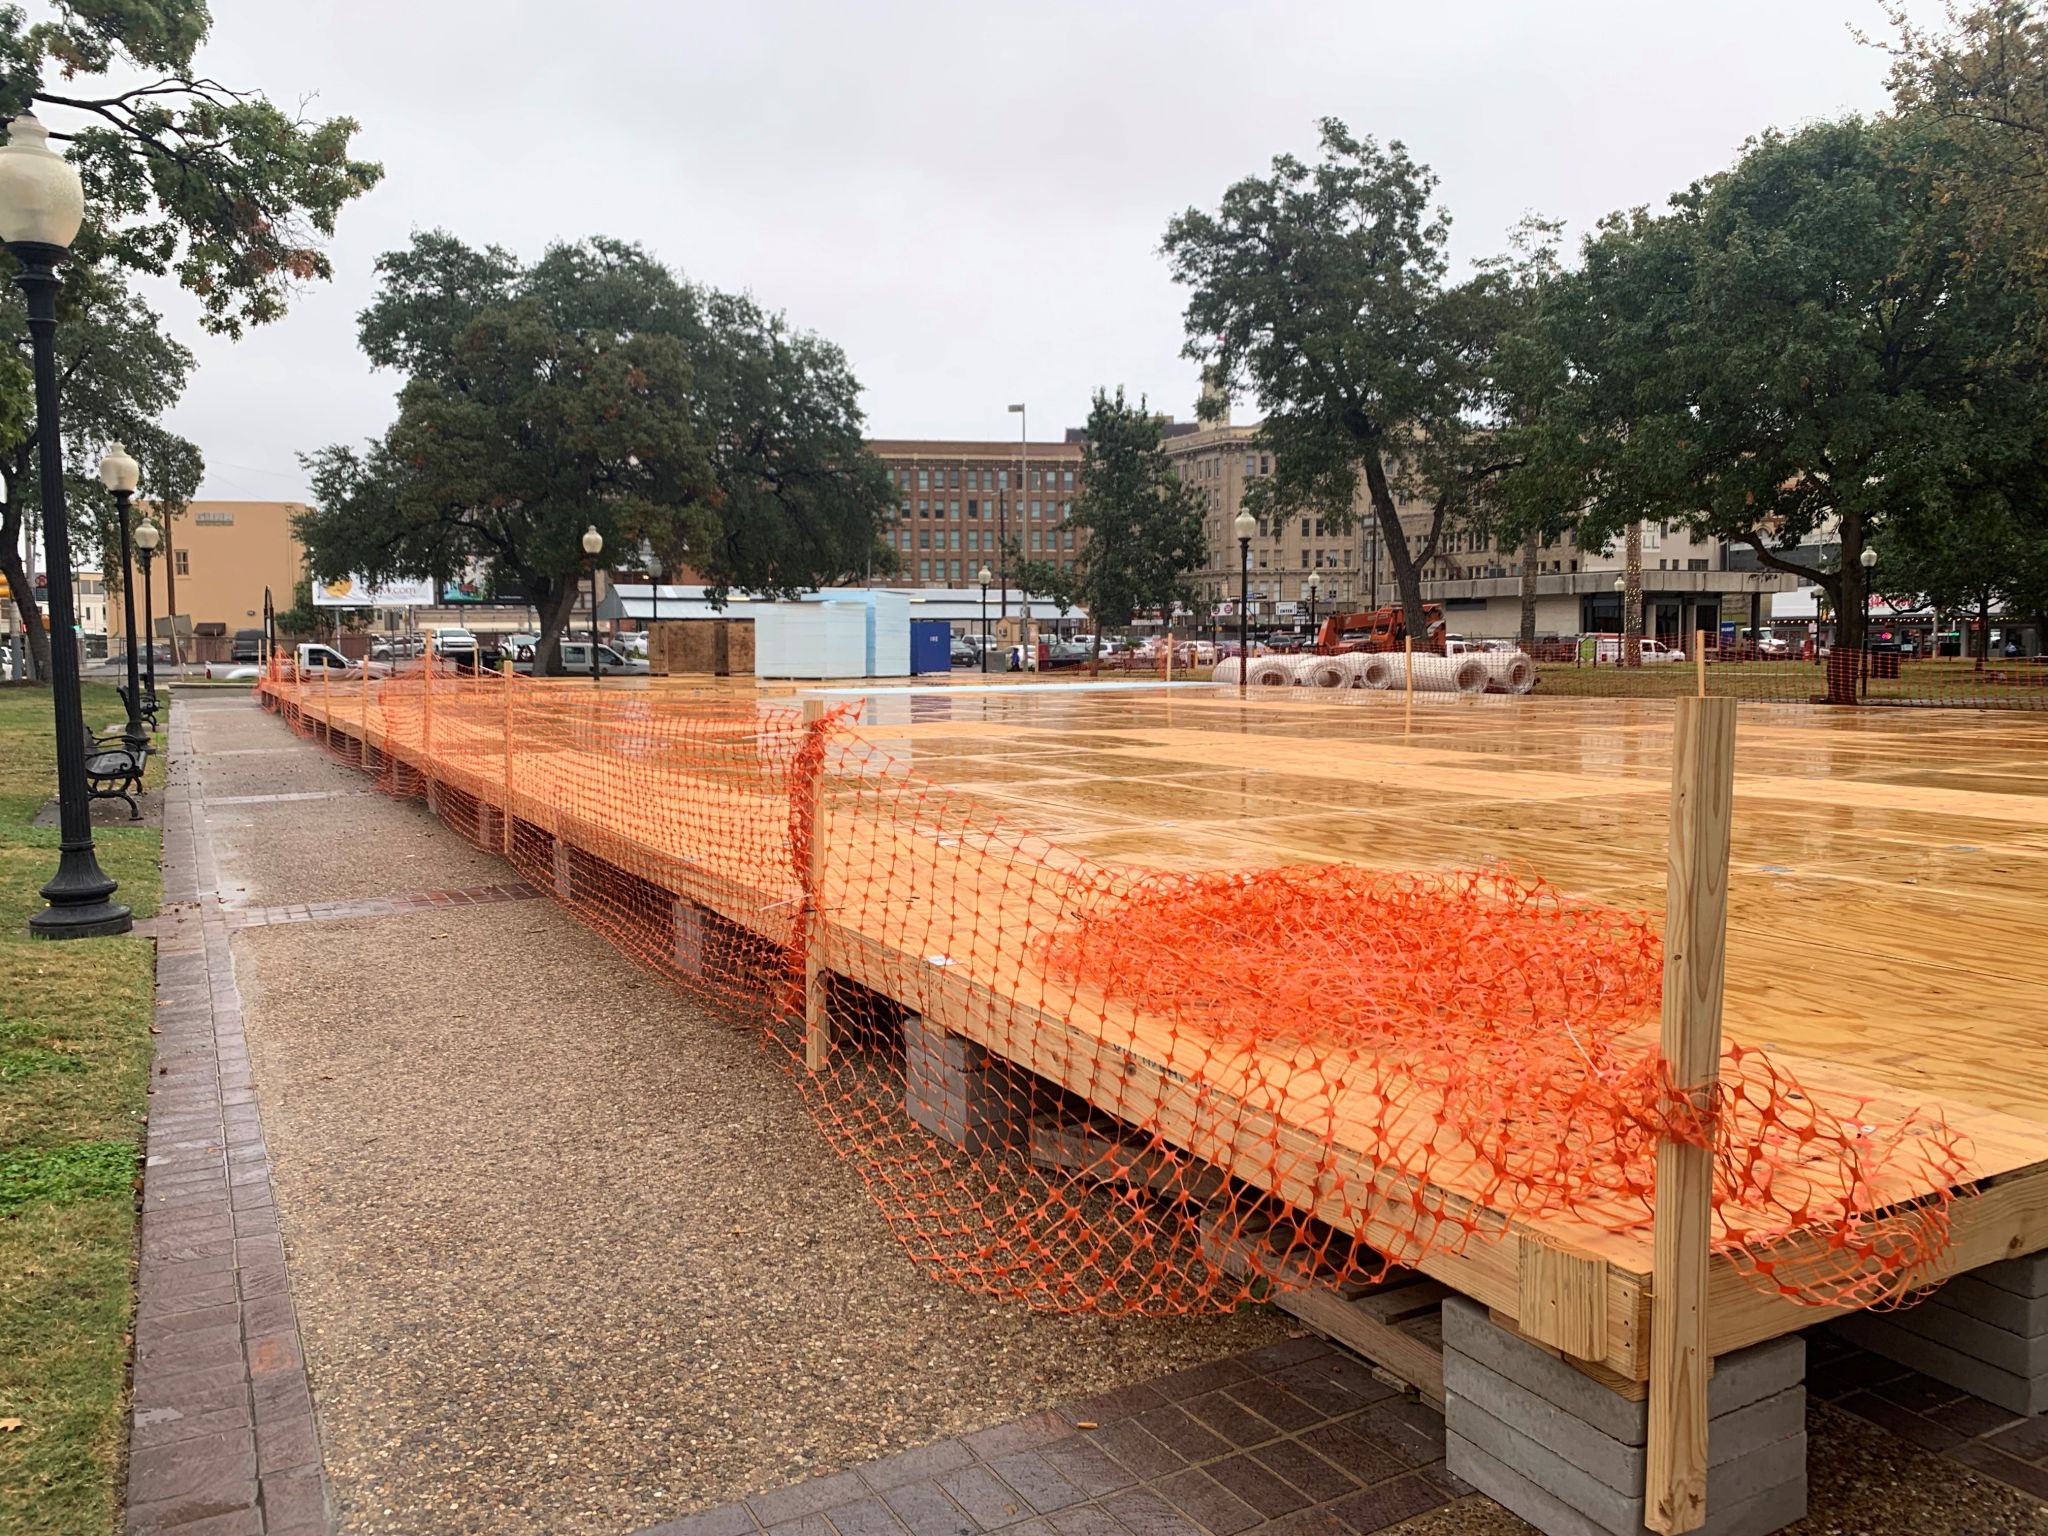 San Antonio ice rink to open earlier than expected at Travis Park with